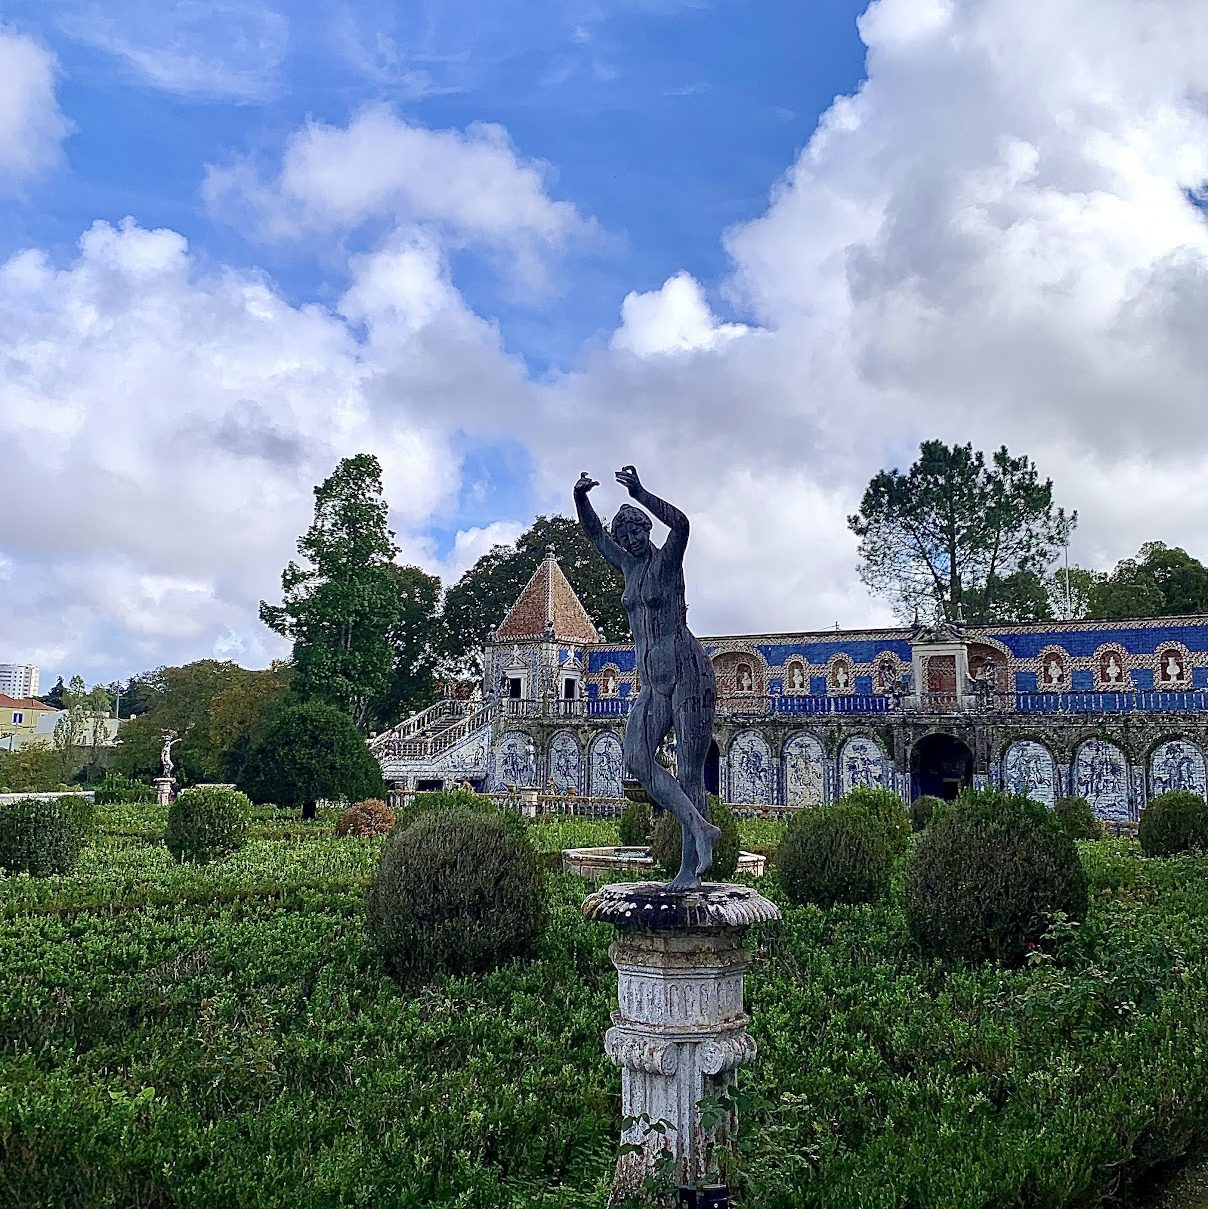 A statue of a woman with her arms raised in a palace garden